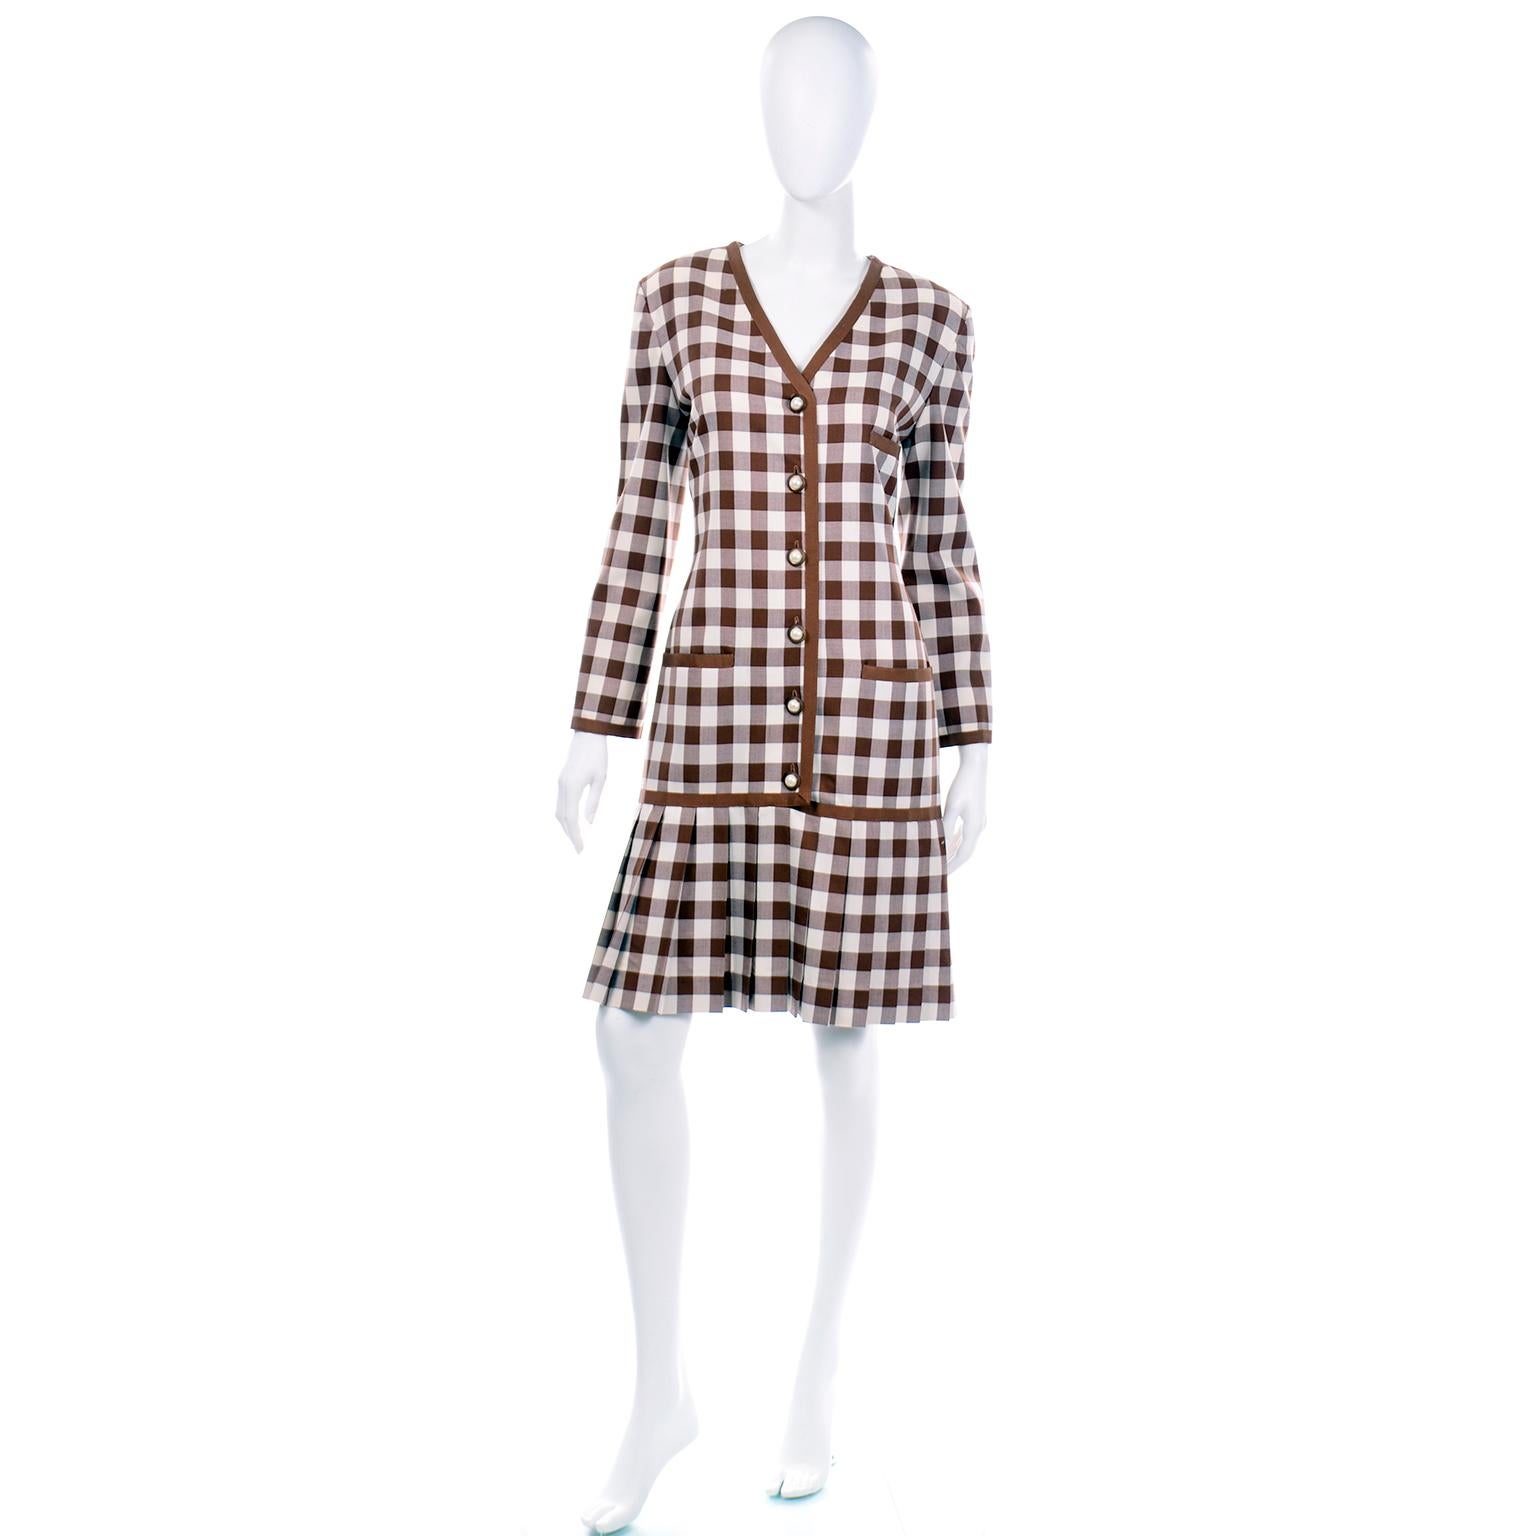 This is a a really fun deadstock Oscar de la Renta dress. This brown and white check dress has a v-neck with pearl buttons down the center front for opening and a fun pleated hem. There are two functional slit pockets and single breast slit pocket